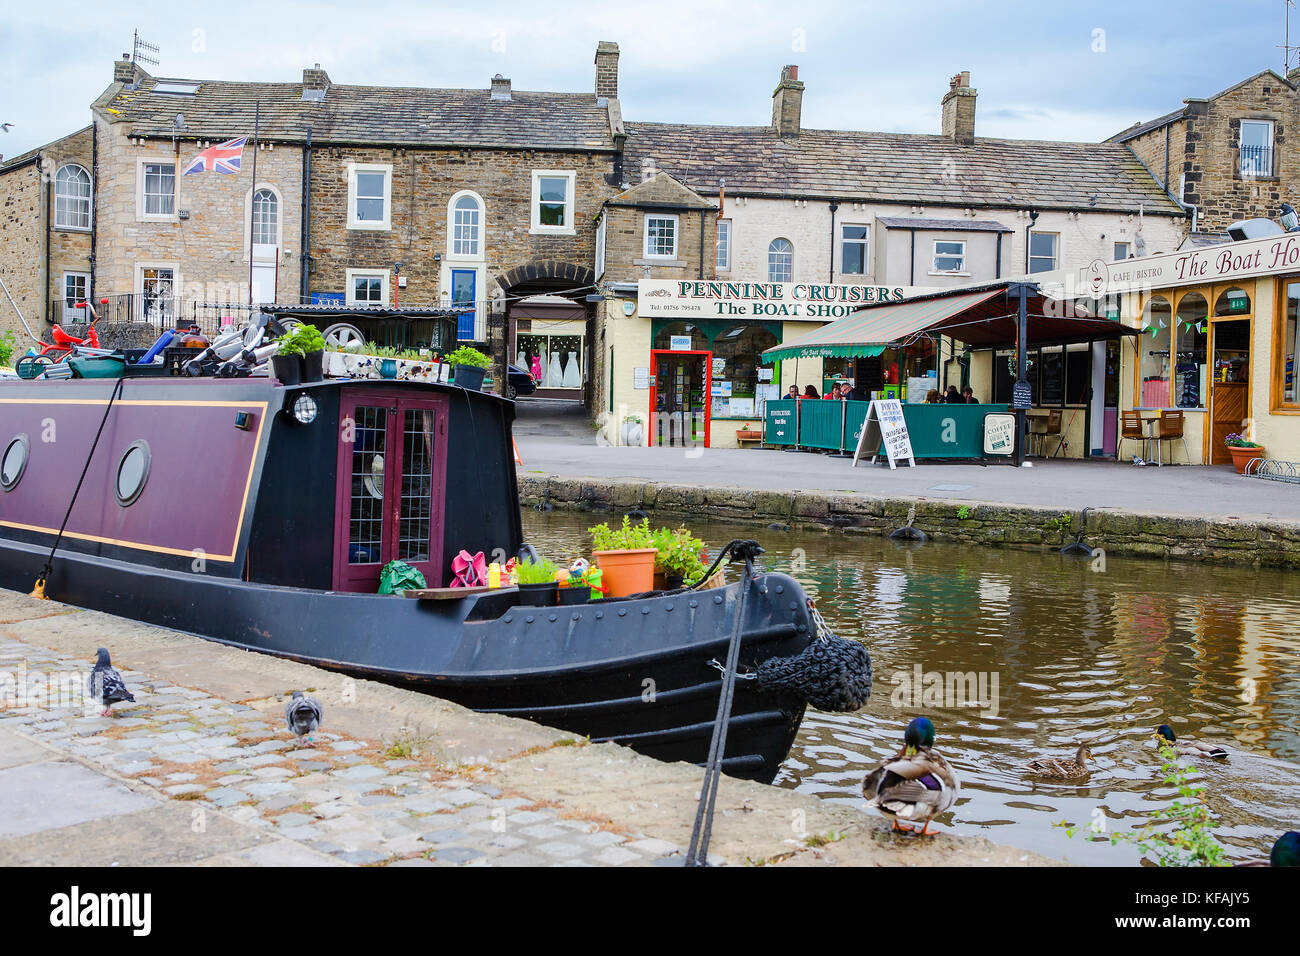 Narrow boat in the canal basin at the junction of the Springs Branch Canal and the Leeds and Liverpool Canal, Skipton, Yorkshire, England, UK Stock Photo